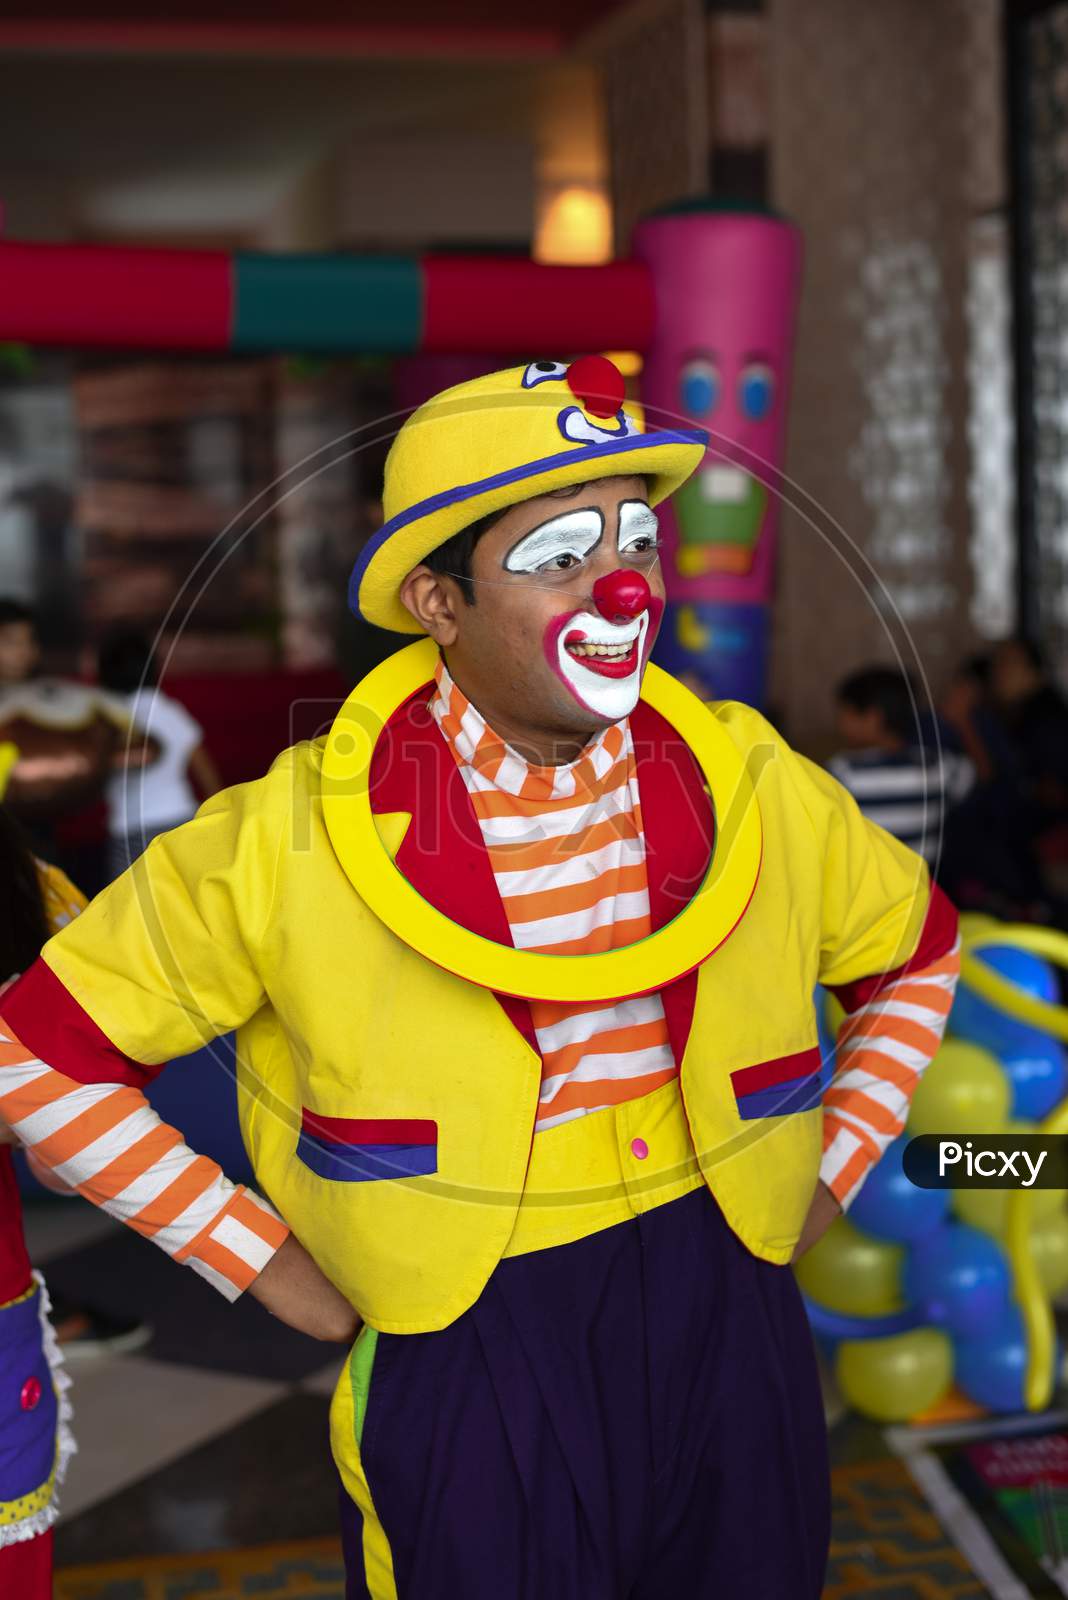 A clown in a pink and yellow suit